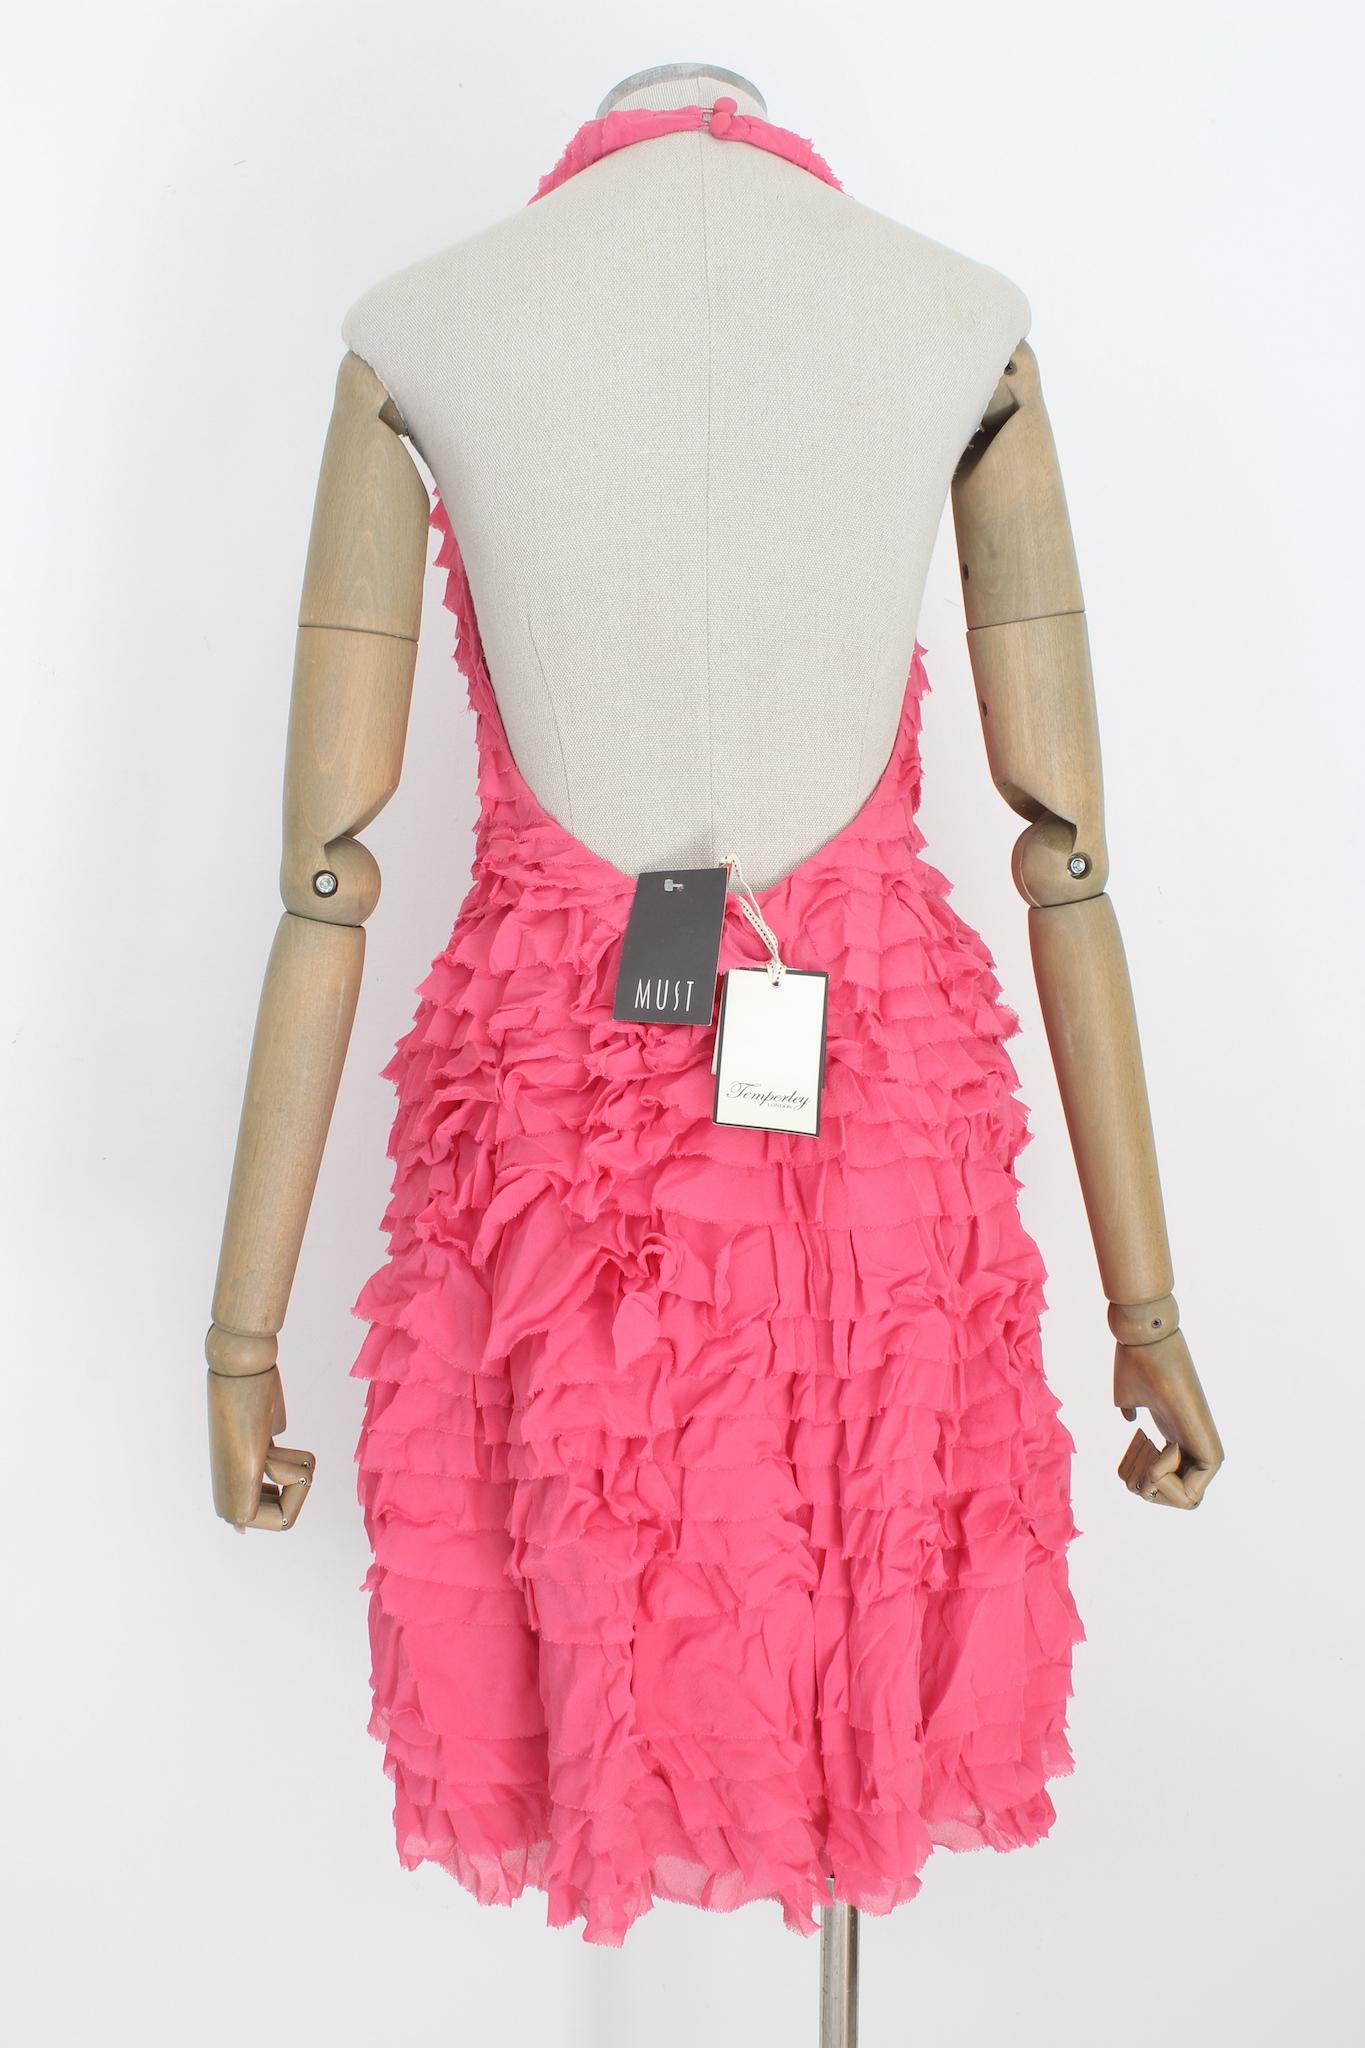 Temperley London 2000s pink cocktail dress. Dress with halter neckline, off the shoulders. Covered with ruffles, side zipper closure, 100% silk fabric, internally lined.

Size: 40 It 6 Us 8 Uk

Bust/Chest: 43 cm
Waist: 33 cm
Length: 107 cm